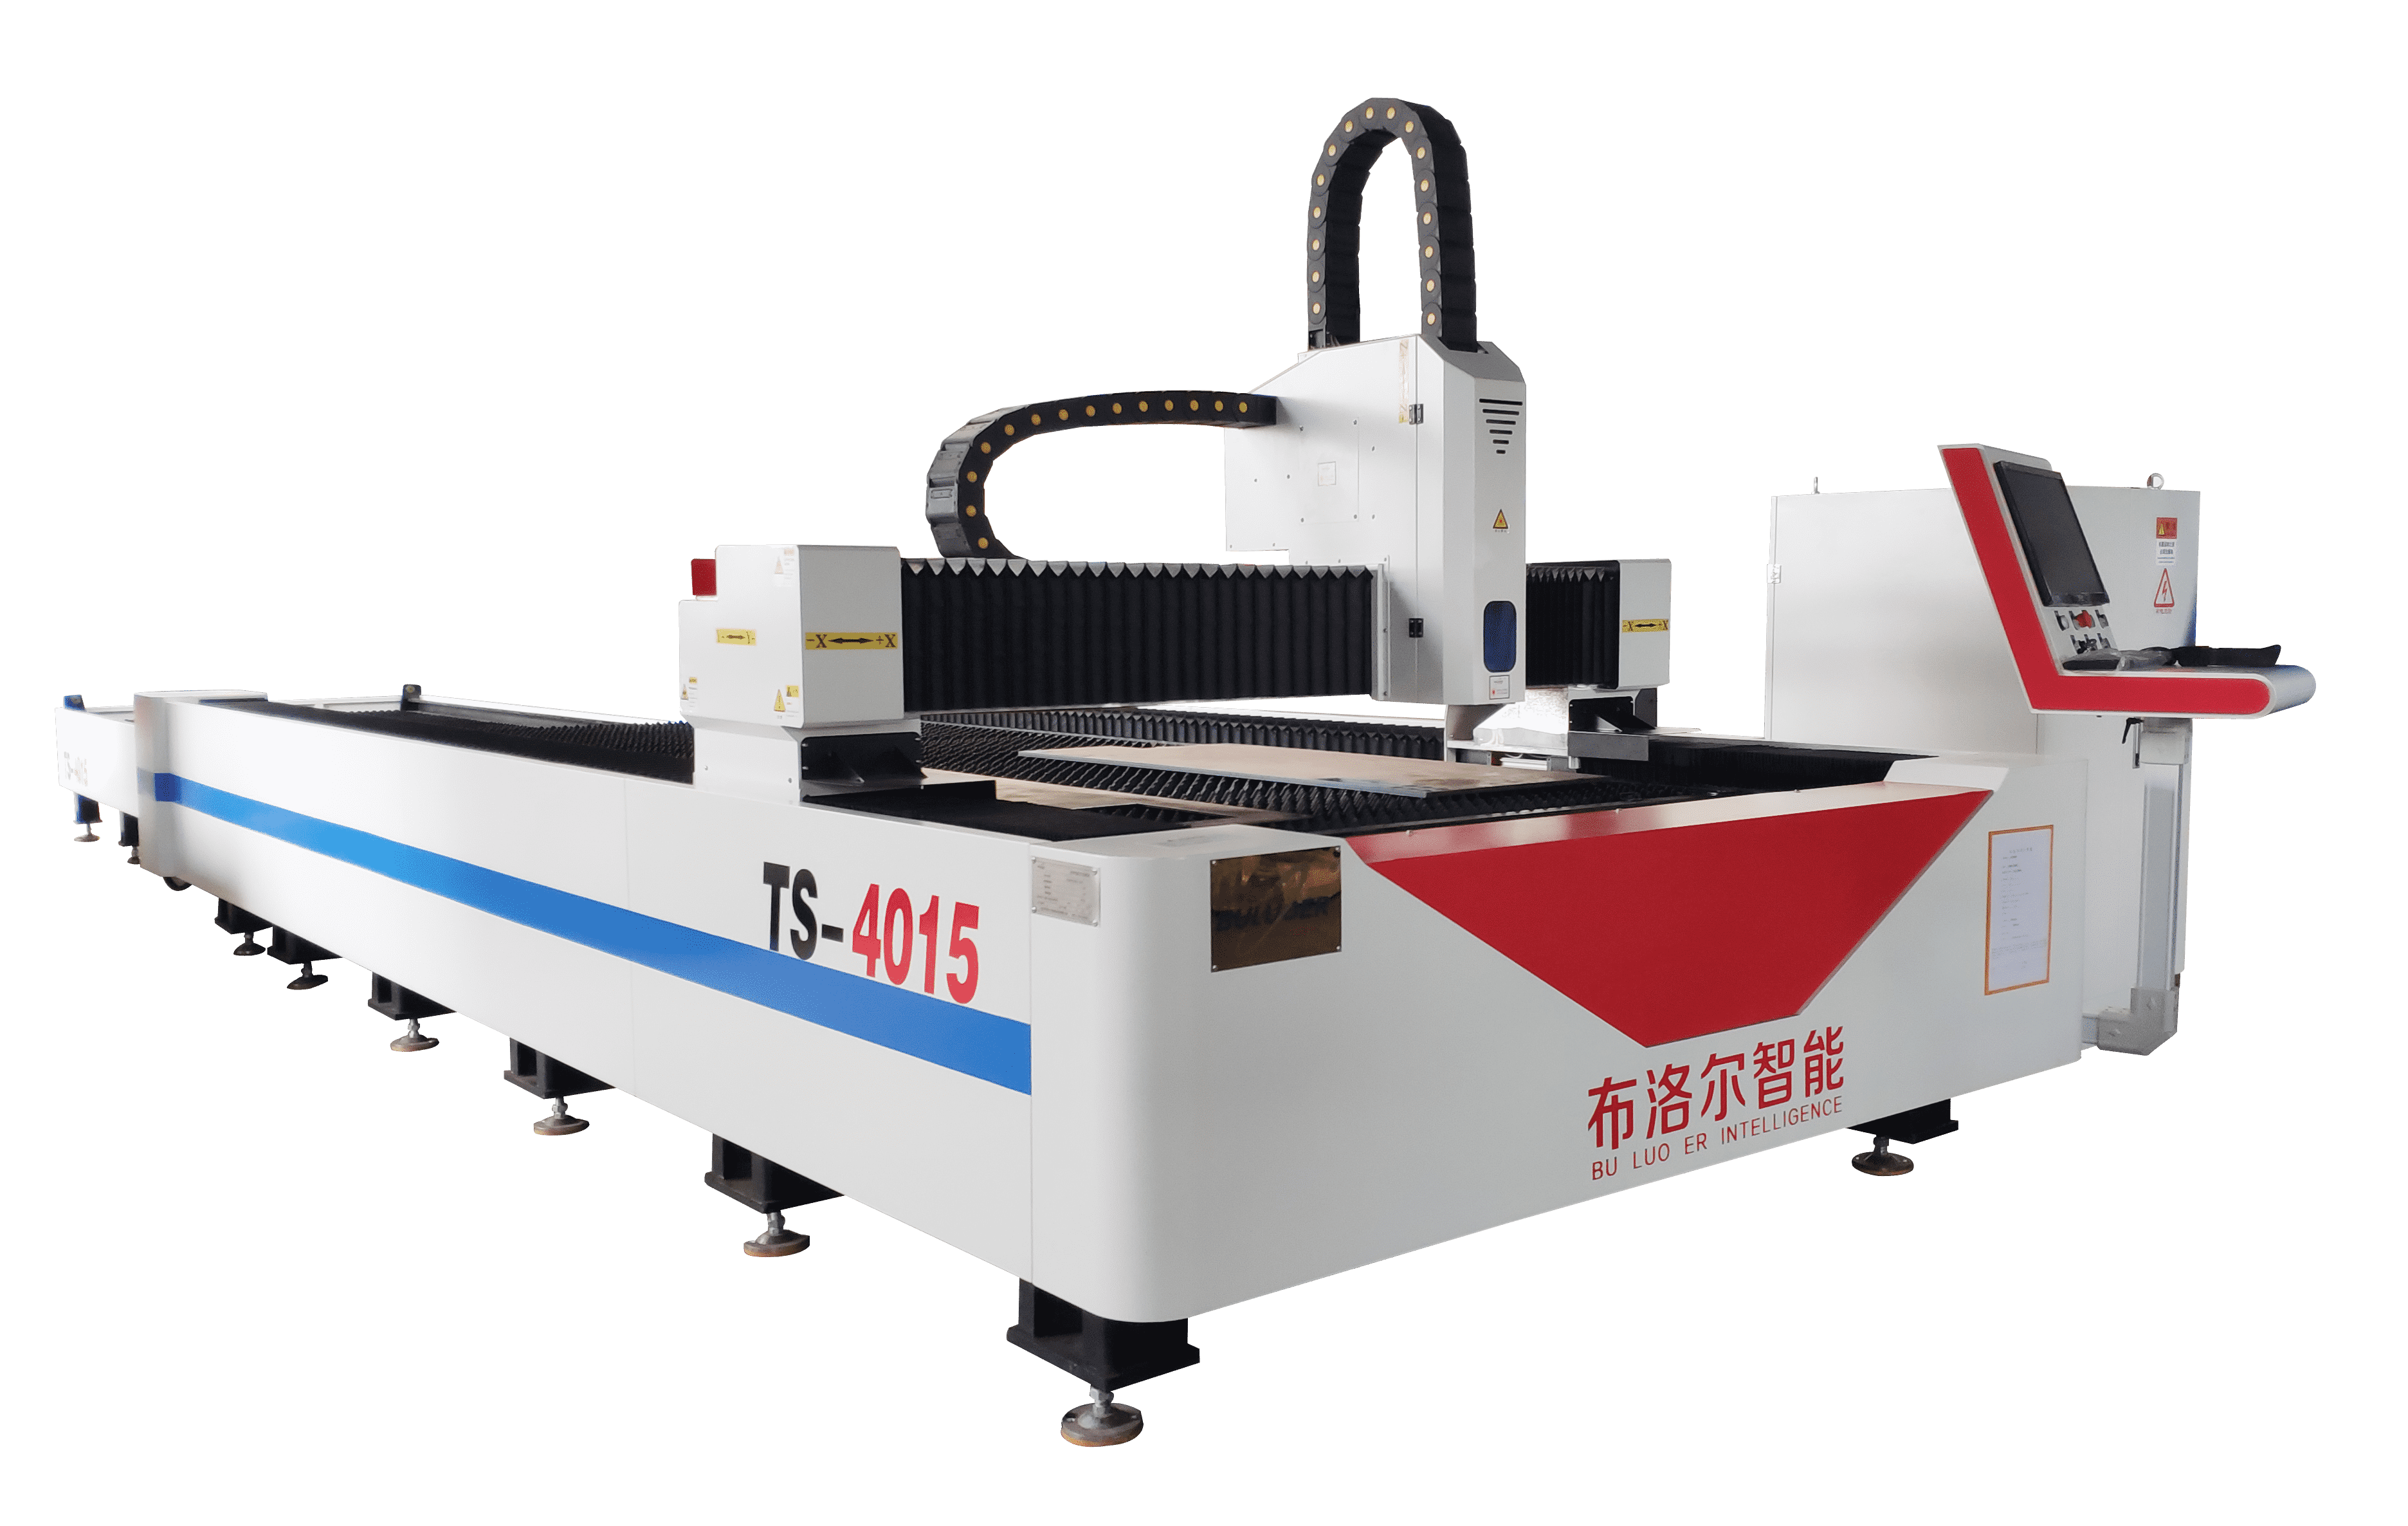 One of Hottest for Ss Fiber Laser Cutting Machine - TS series exchange table fiber laser cutting machine – Buluoer